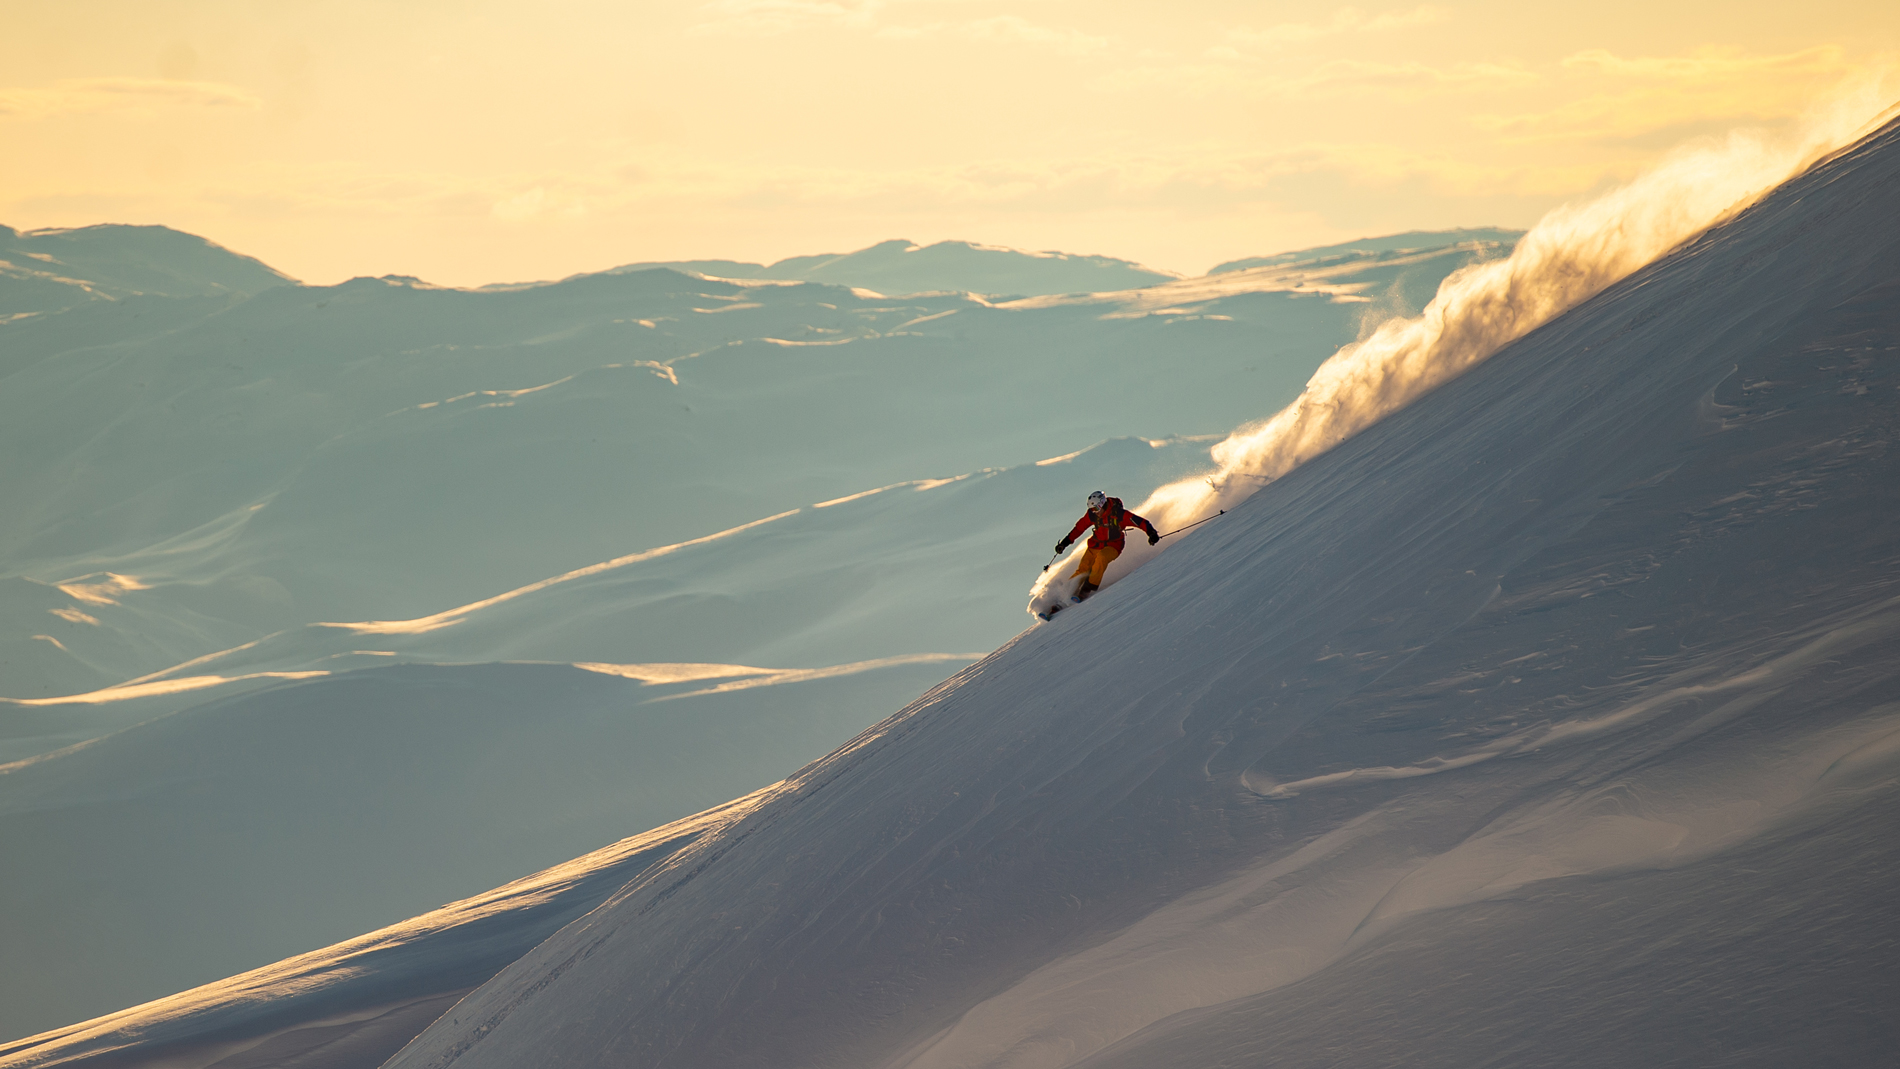 Guiding » Piste To Powder ™ - Off piste skiing and freeriding